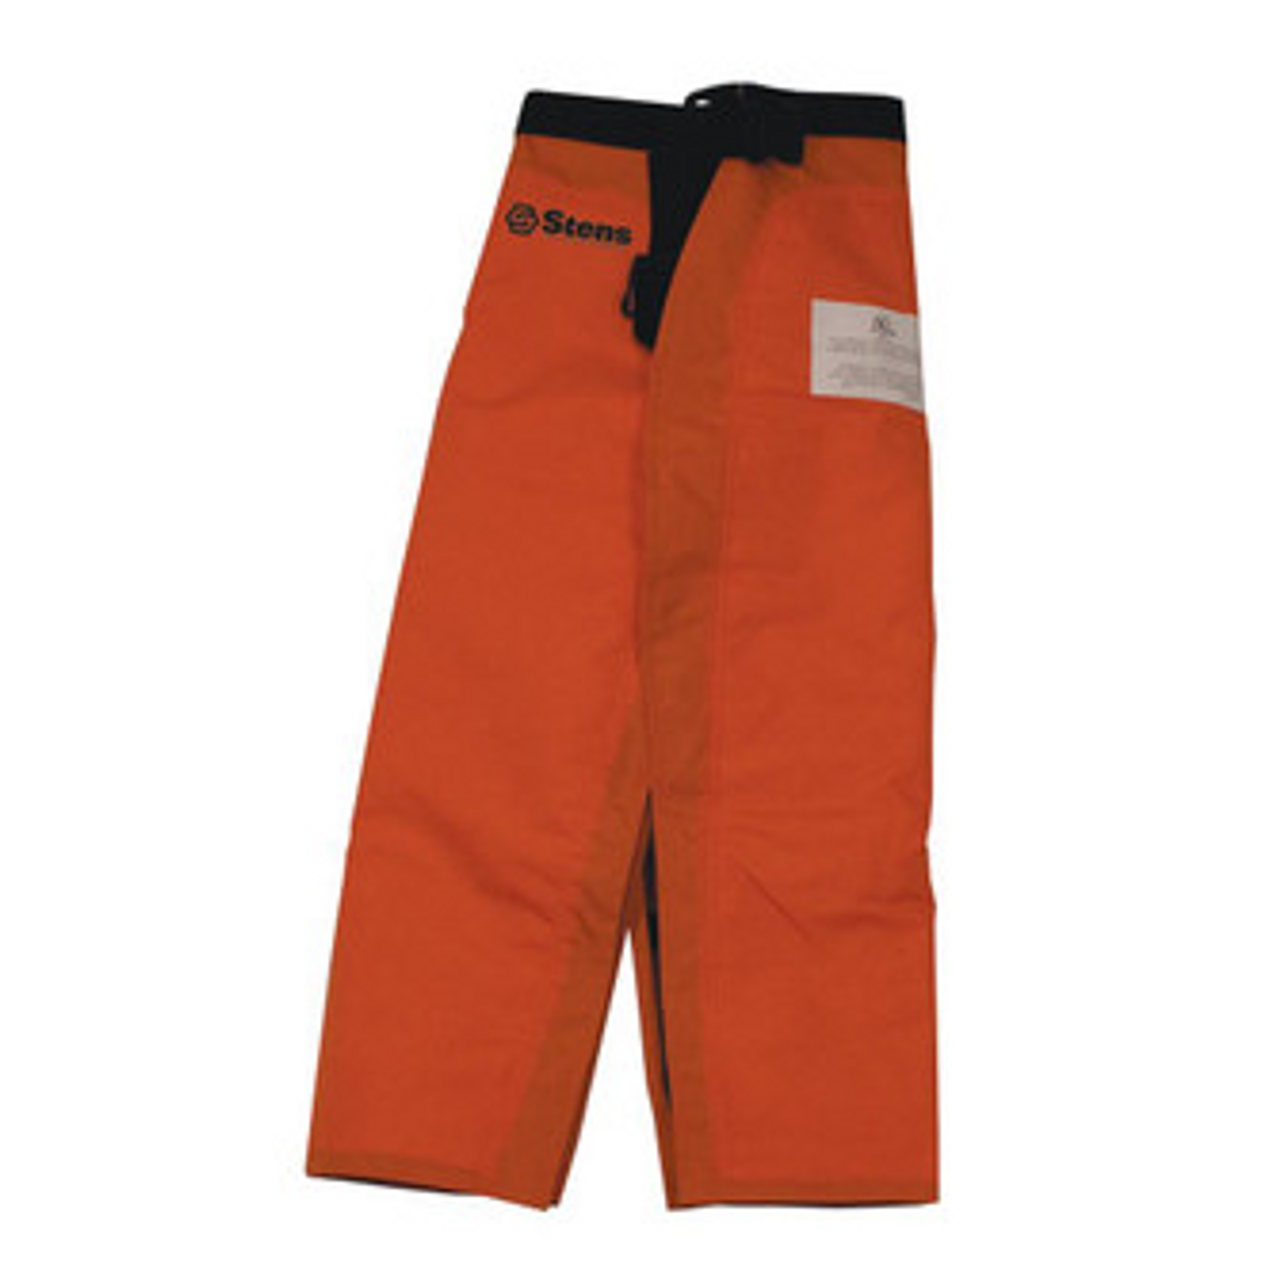 Safety Chaps X-Large (30-42” waist)